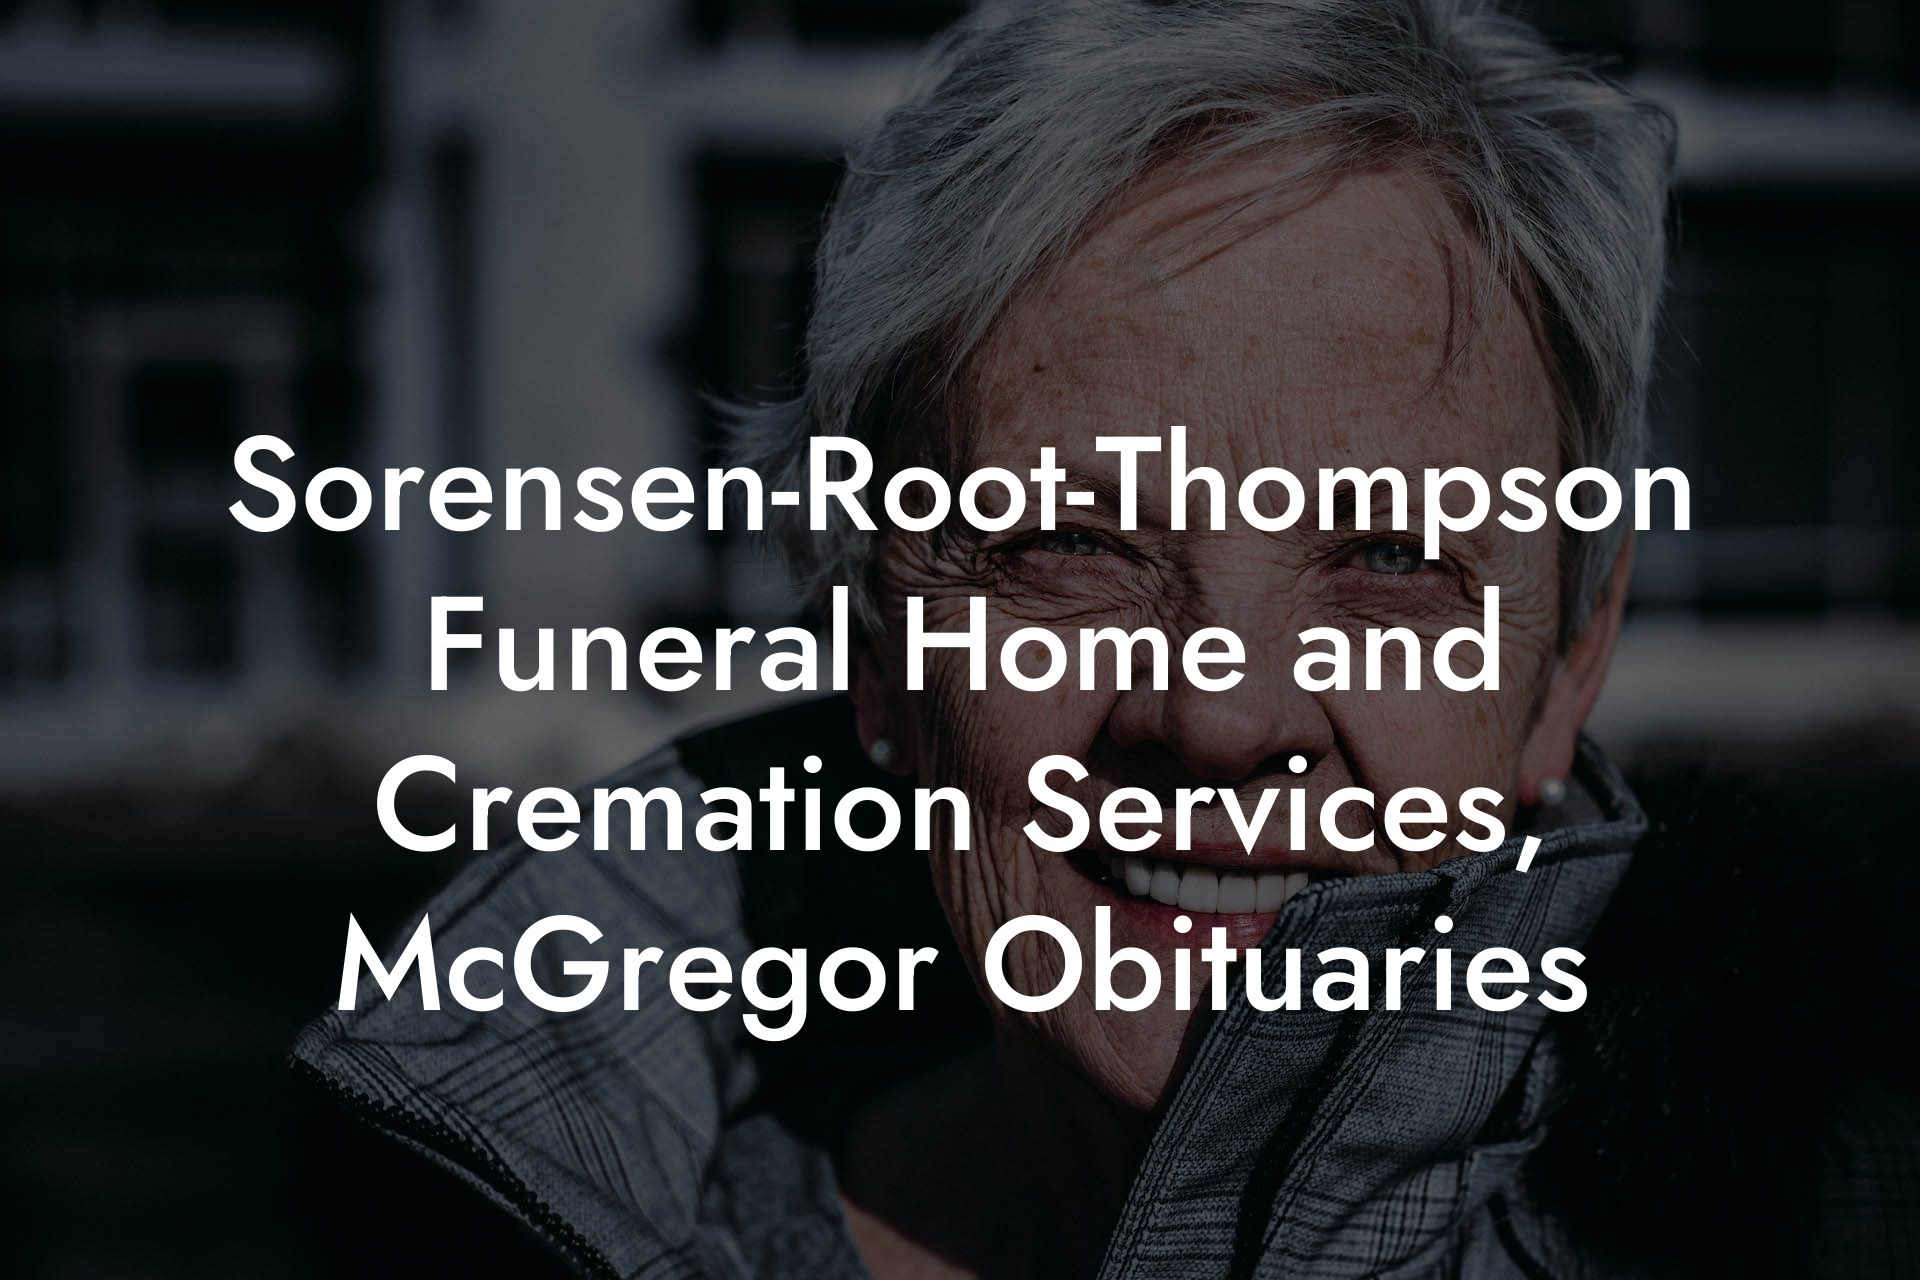 Sorensen-Root-Thompson Funeral Home and Cremation Services, McGregor Obituaries